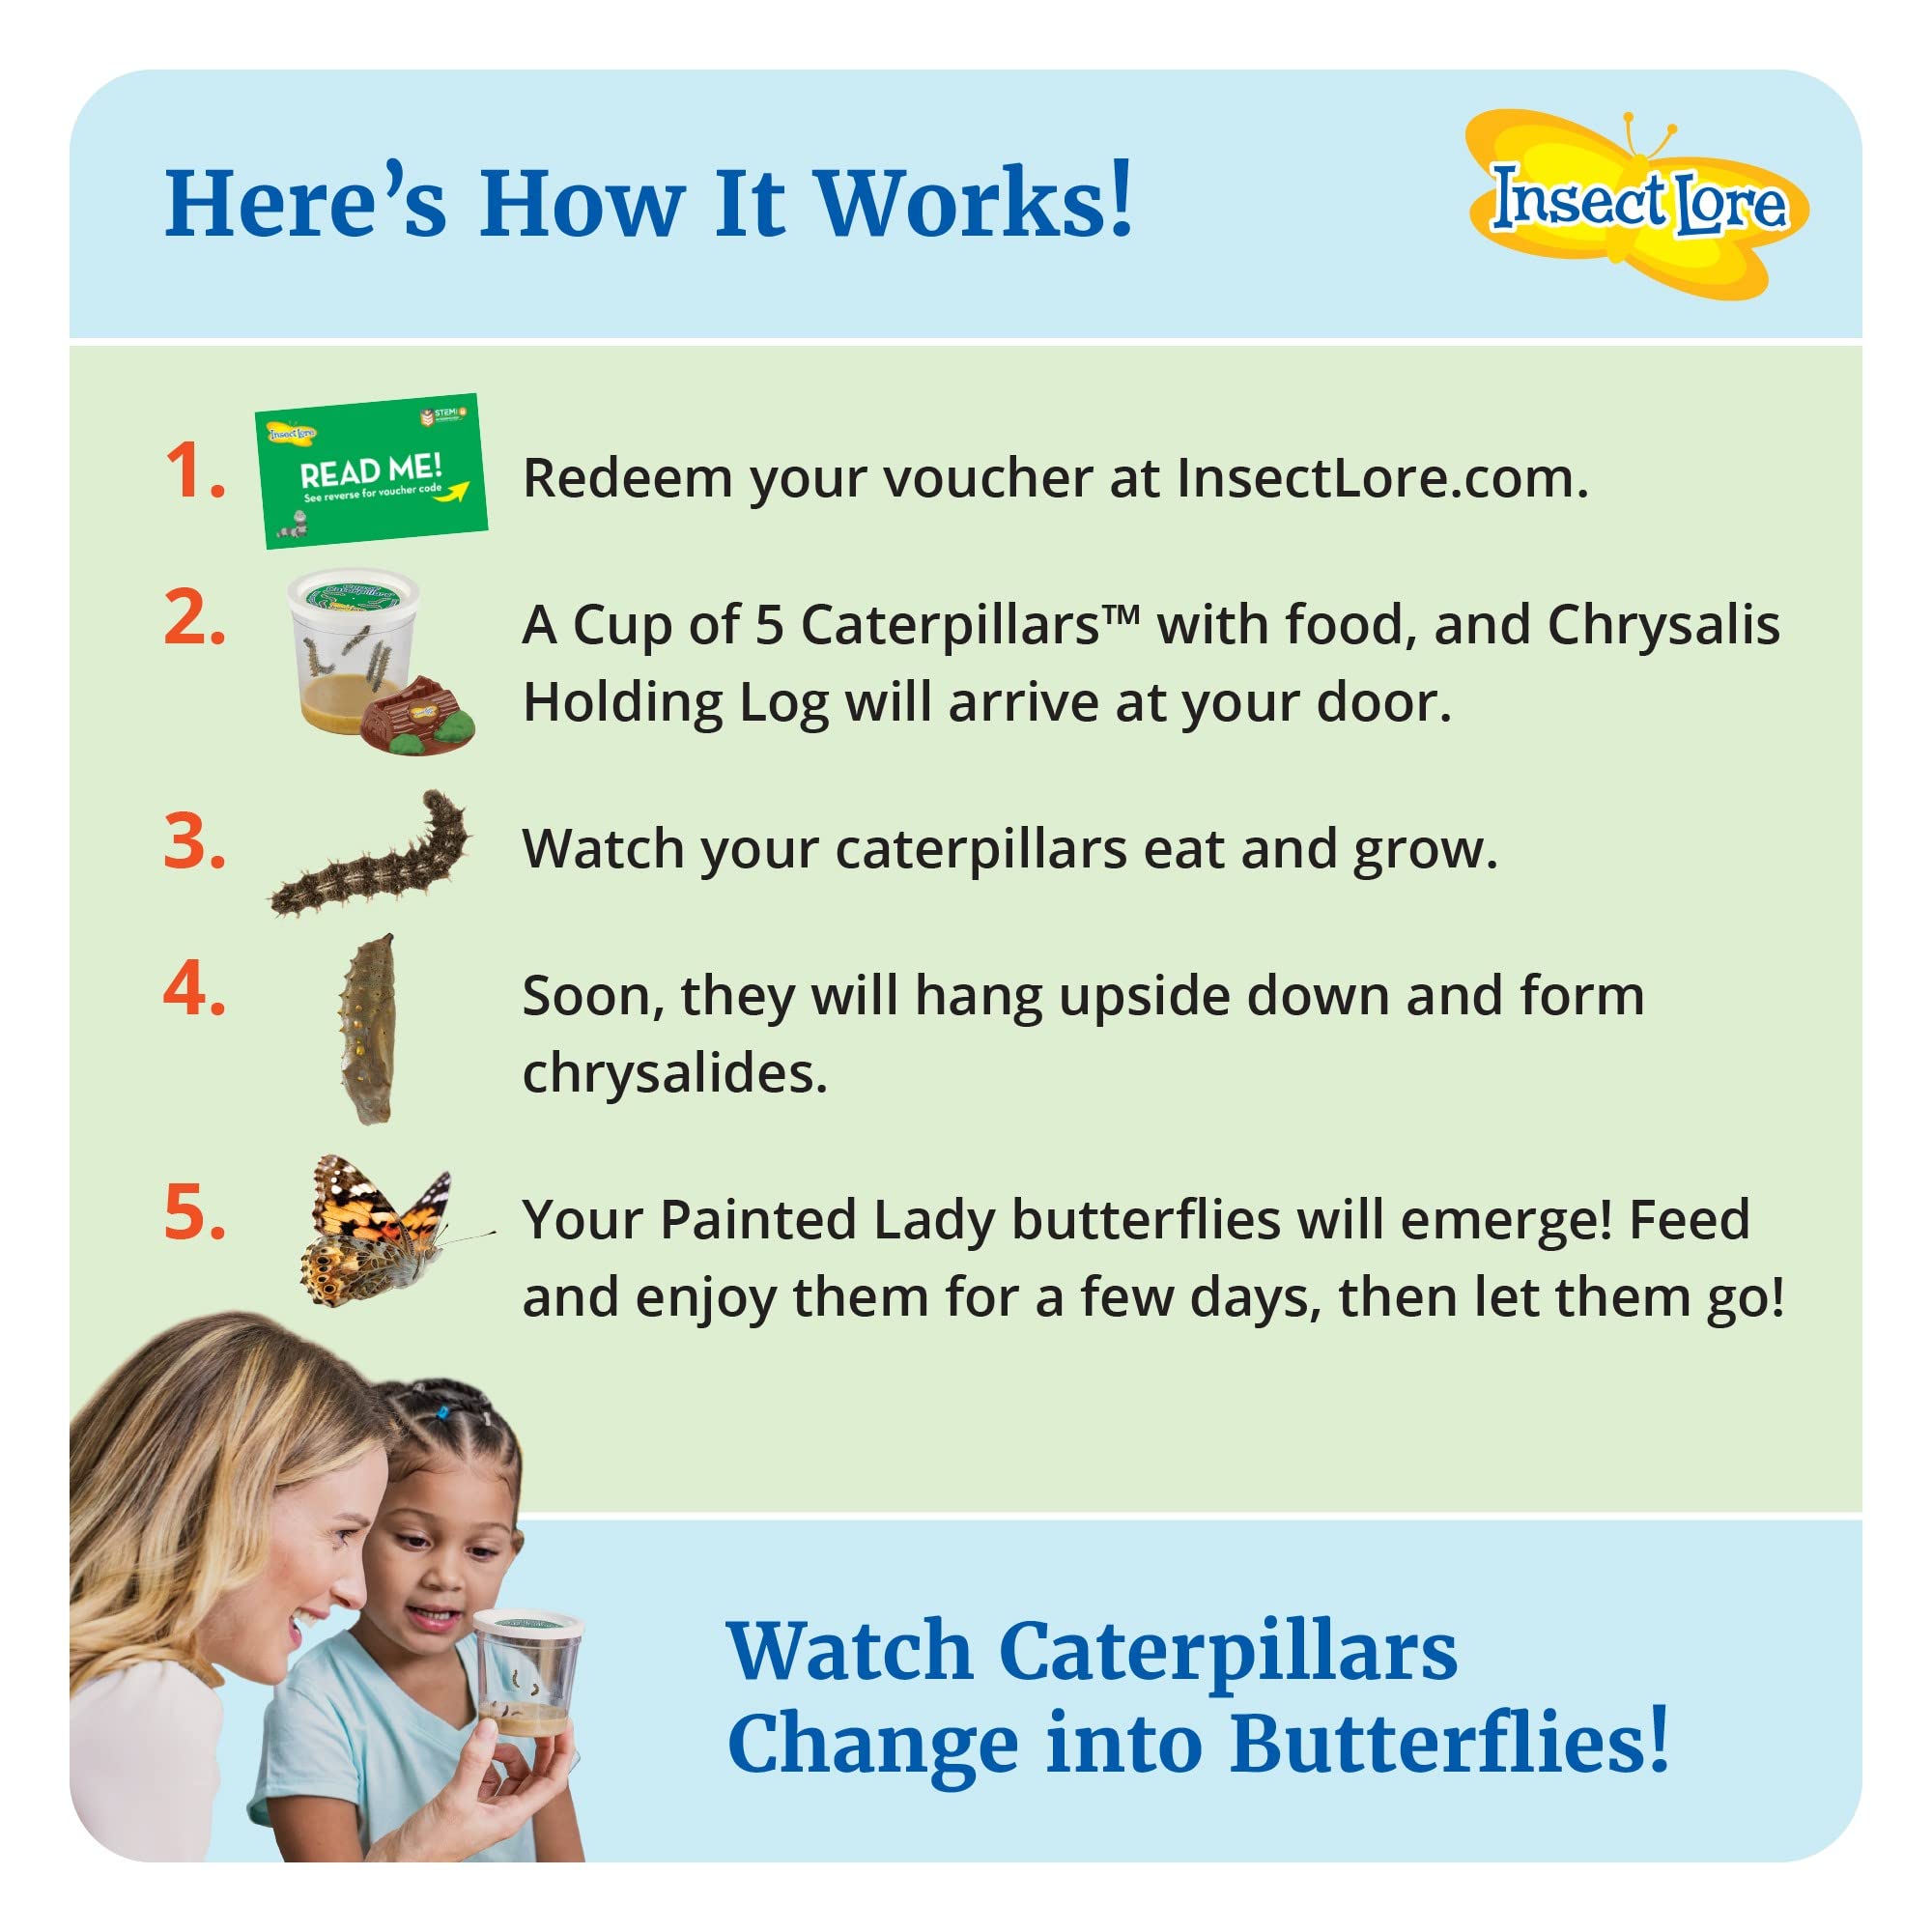 Insect Lore - Butterfly Growing Kit - Butterfly Habitat Kit with Voucher to Redeem 5 Caterpillars, STEM Journal, Butterfly Feeder & More – Life Science & STEM Education – Butterfly Science Kit